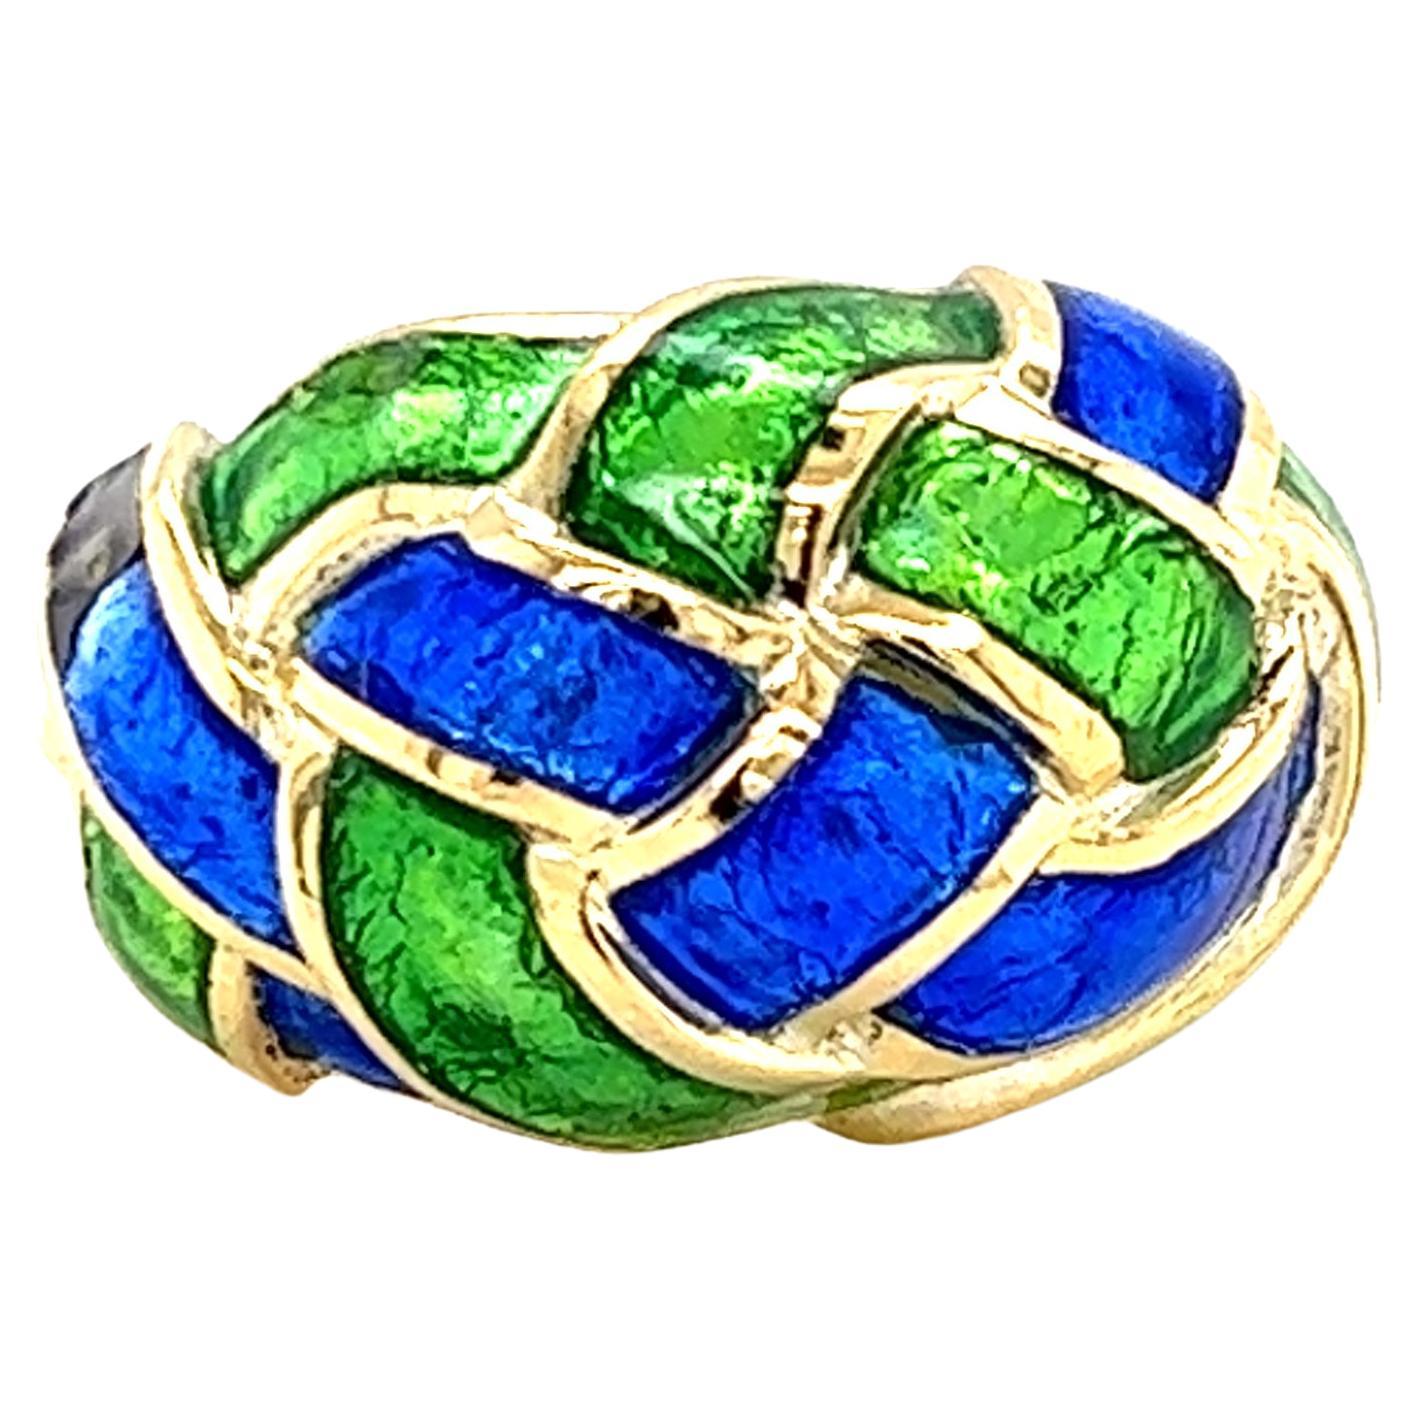 One 18 karat yellow gold glossed green and blue enamel woven knot dome ring, designed by Schlumberger for Tiffany & Co. One of the smallest side pieces of enamel has been repaired (see photos).  The ring is a finger size 7.5 and cannot be resized.